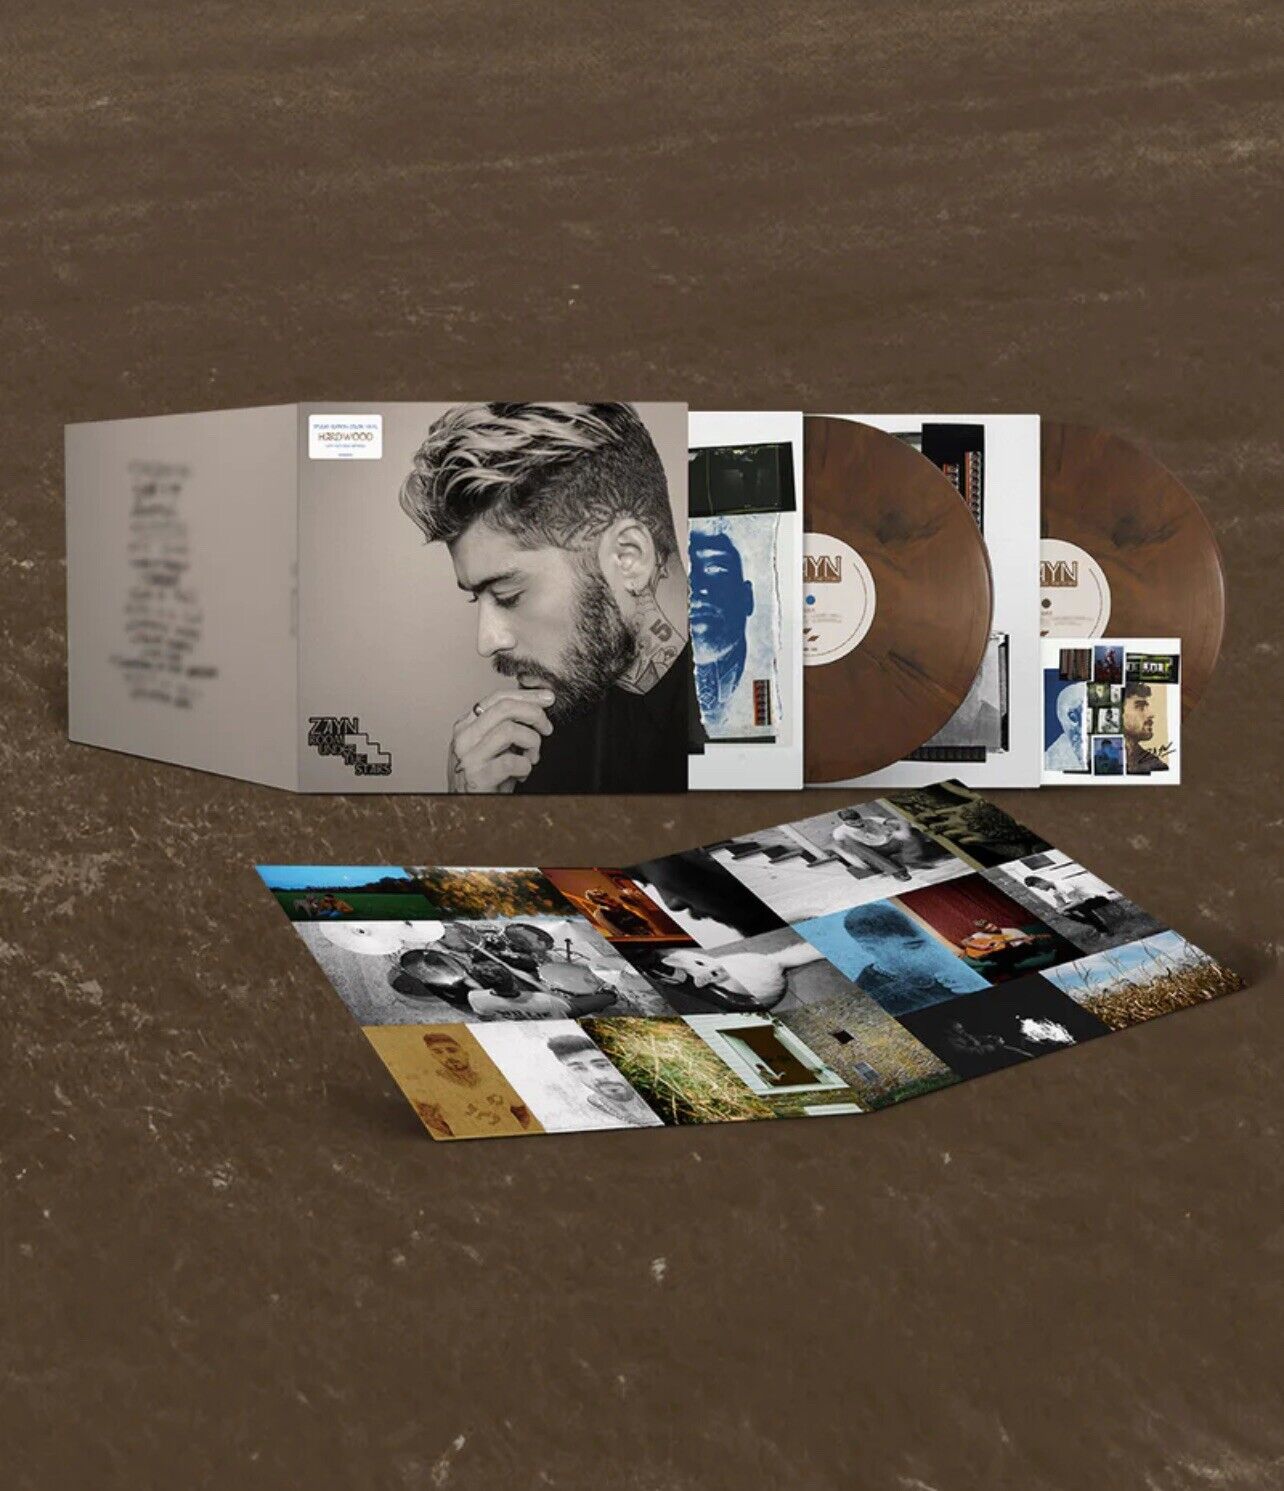 Room Under The Stairs D2C Exclusive Vinyl + Signed Insert Preorder